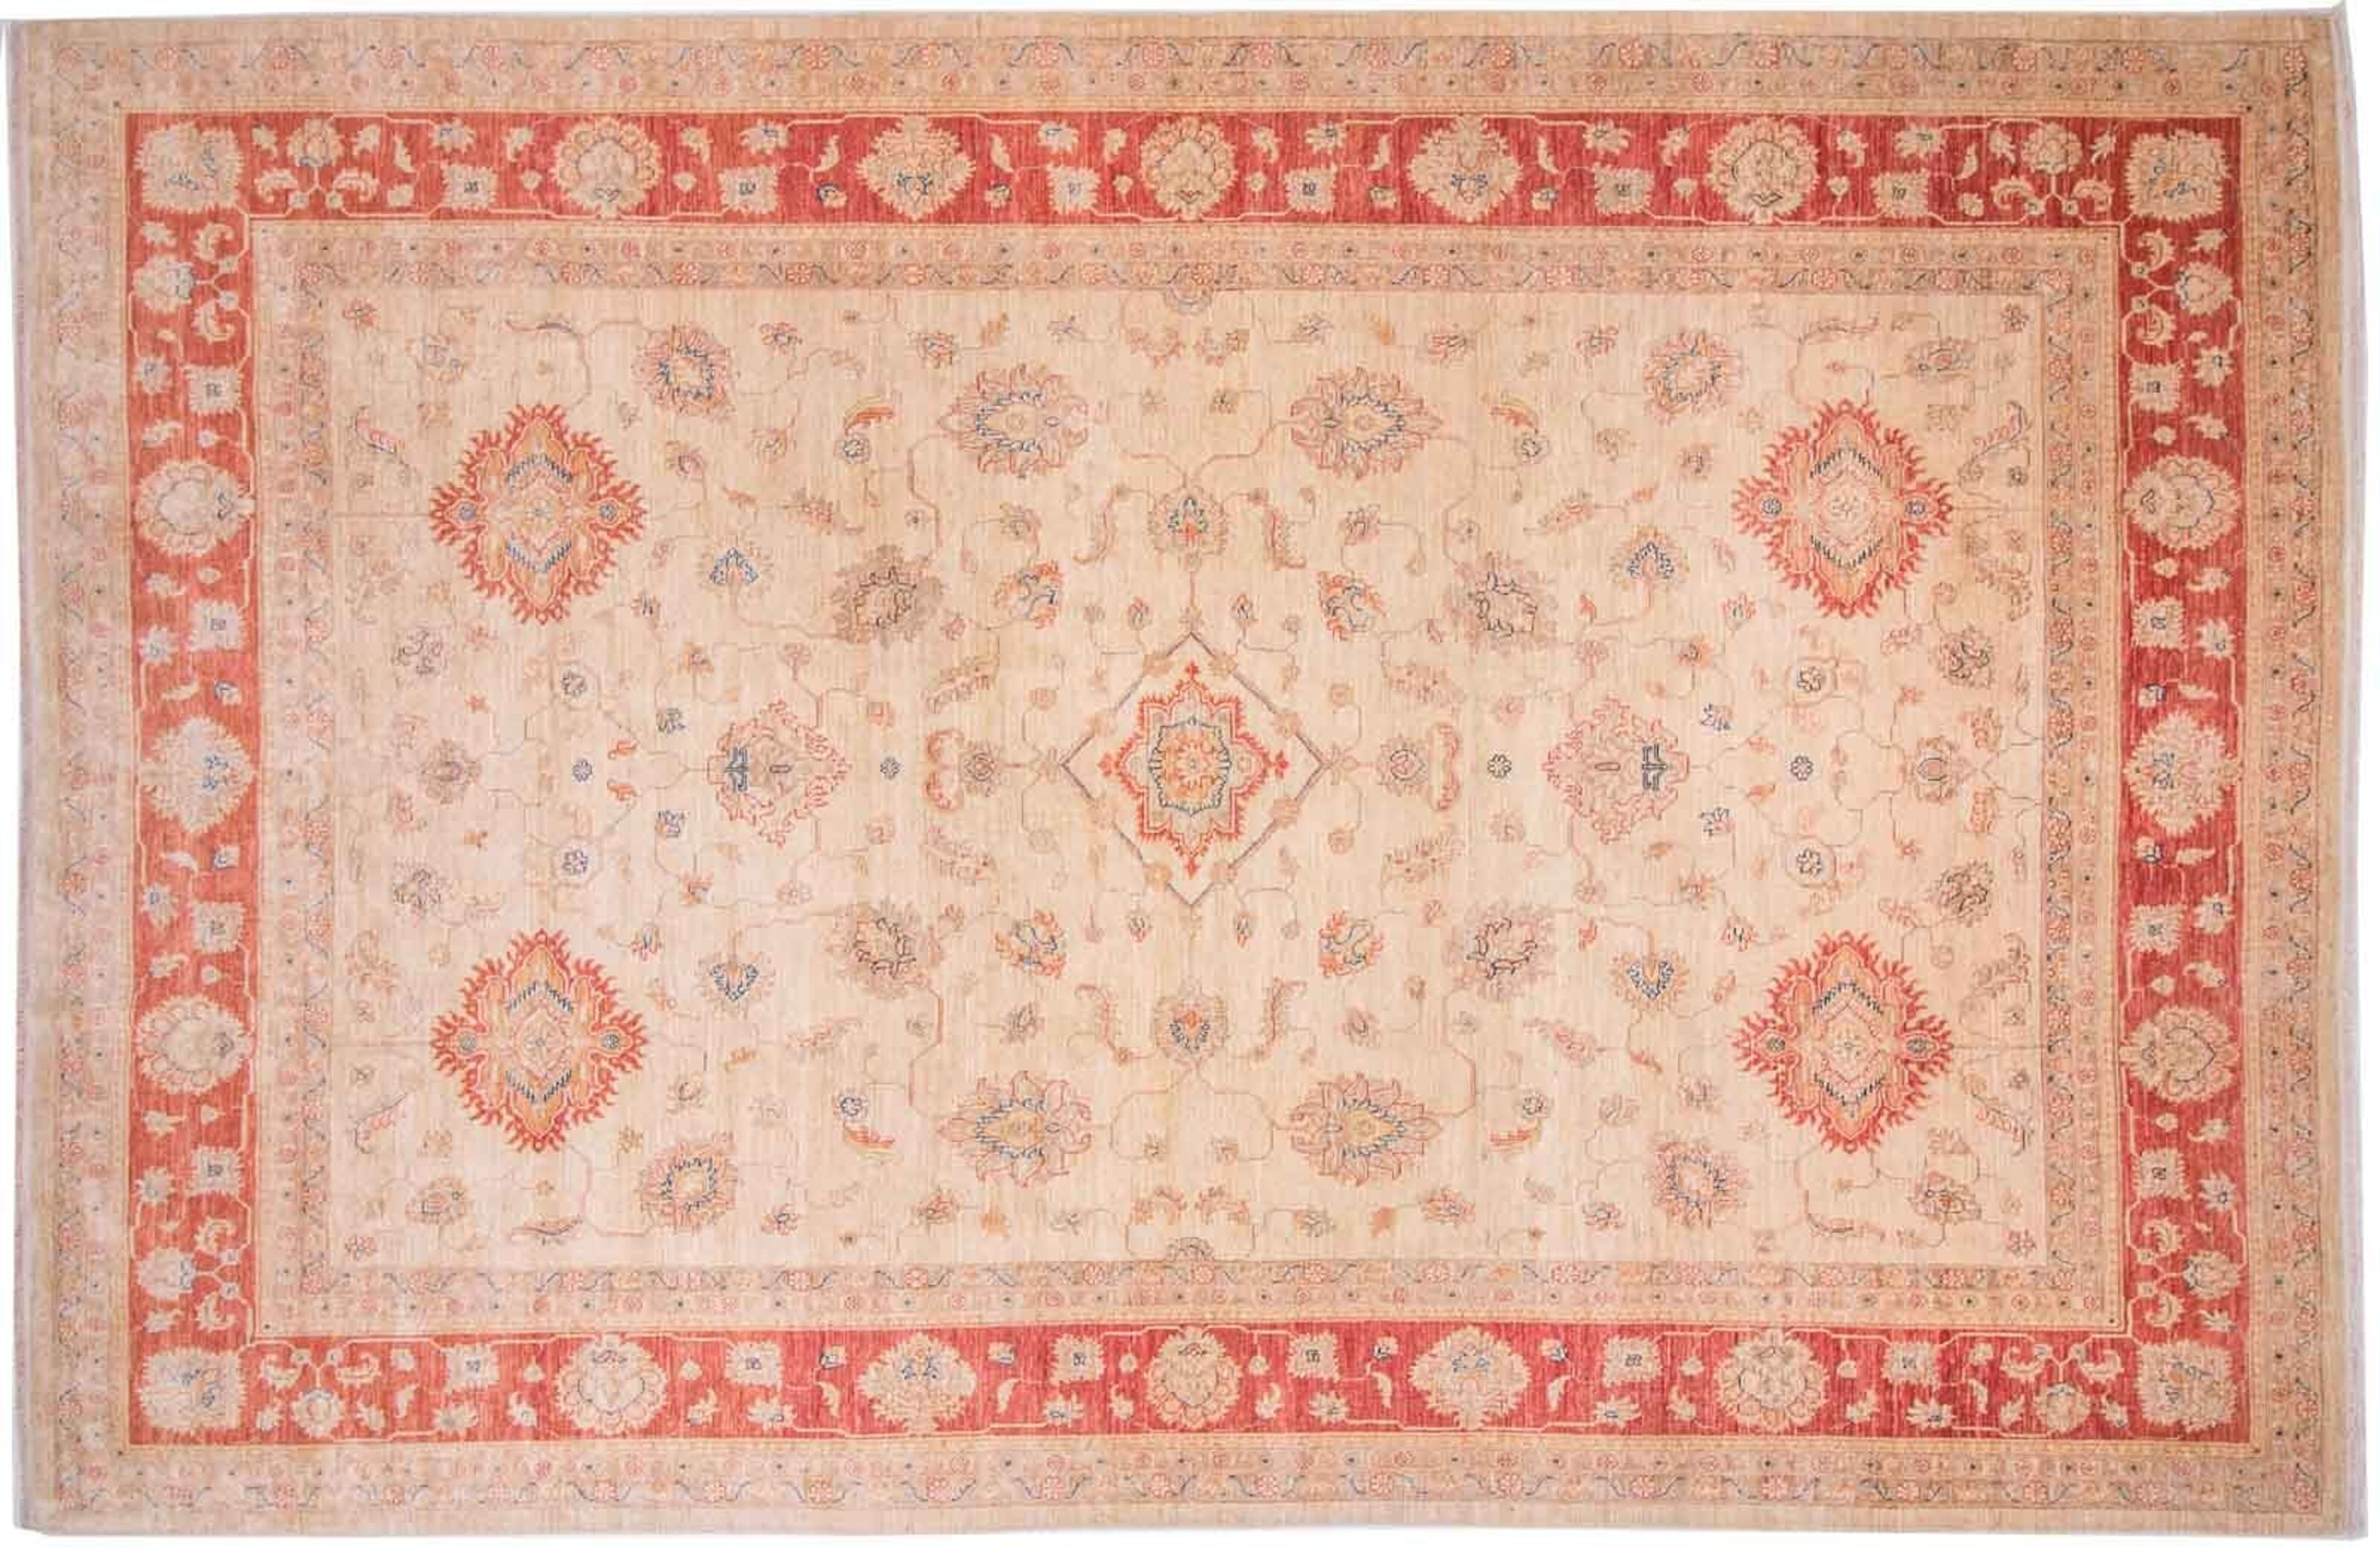 Buy wholesale Afghan Feiner Chobi Ziegler 374x248 hand-knotted carpet  250x370 red flower pattern